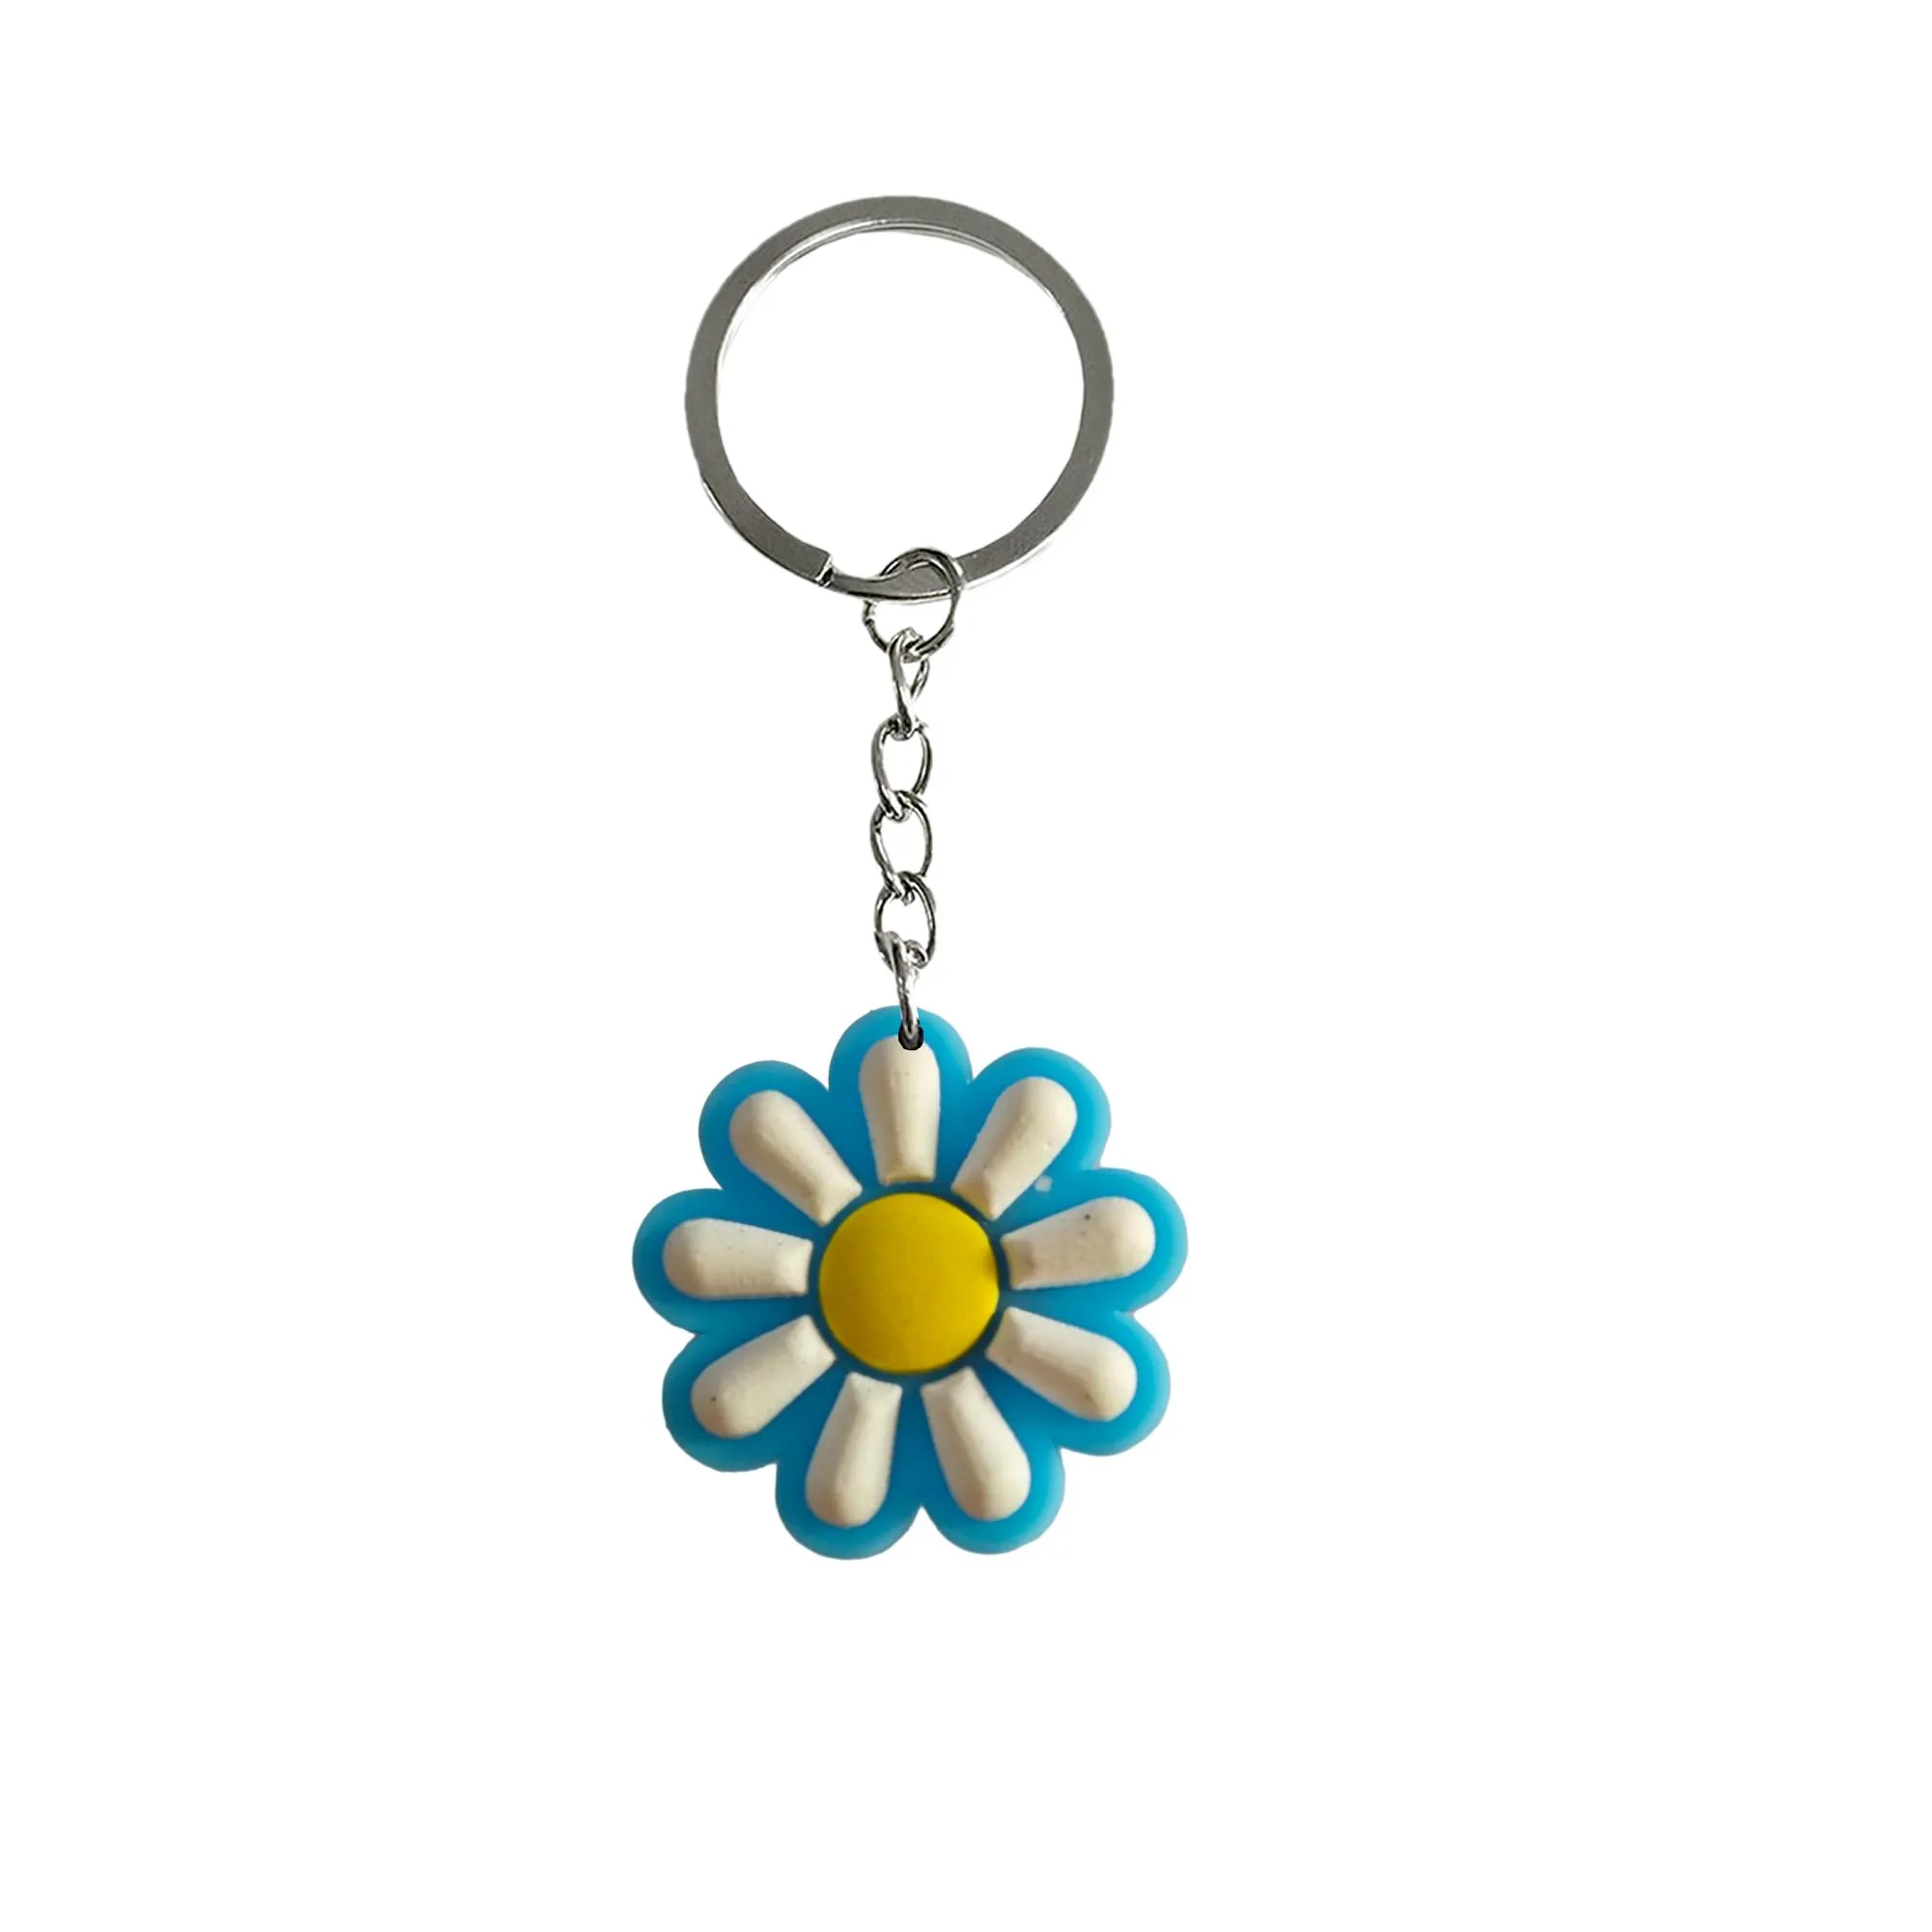 flower 2 11 keychain cool colorful anime character with wristlet keyrings for bags key chain girls keyring suitable schoolbag accessories backpack handbag and car gift valentines day ring classroom prizes